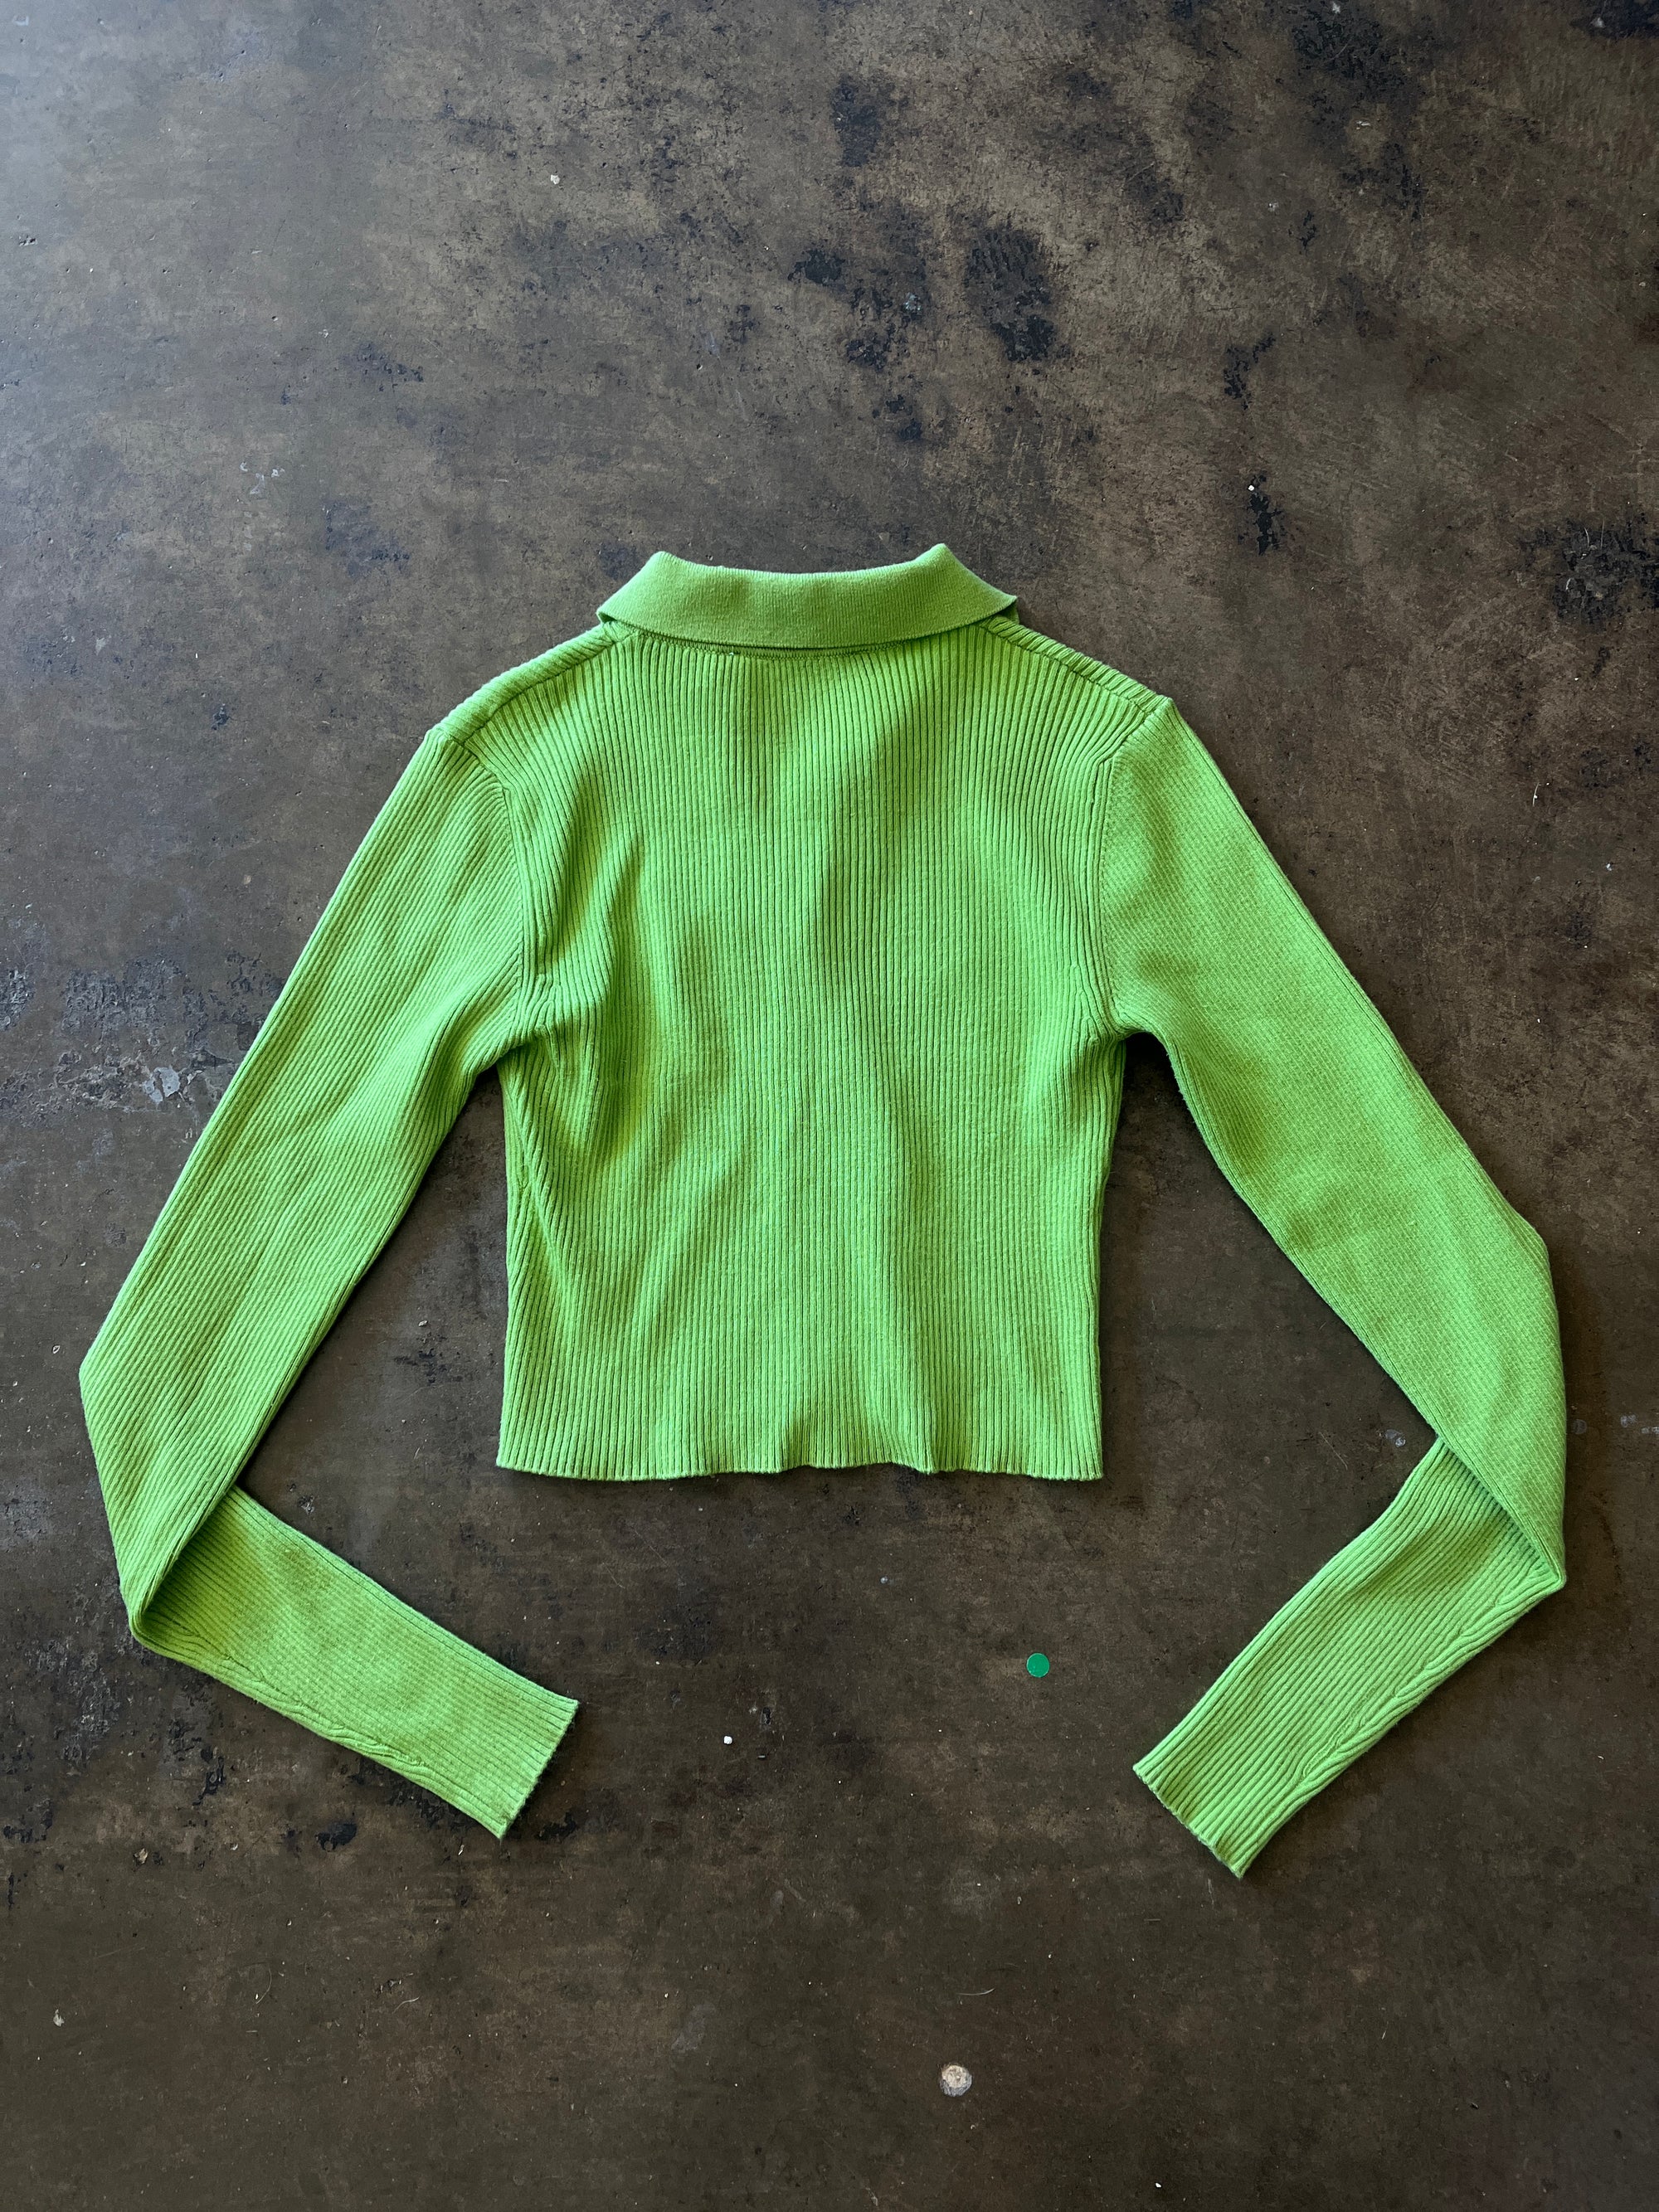 TWIN Green Button Front Long Sleeve